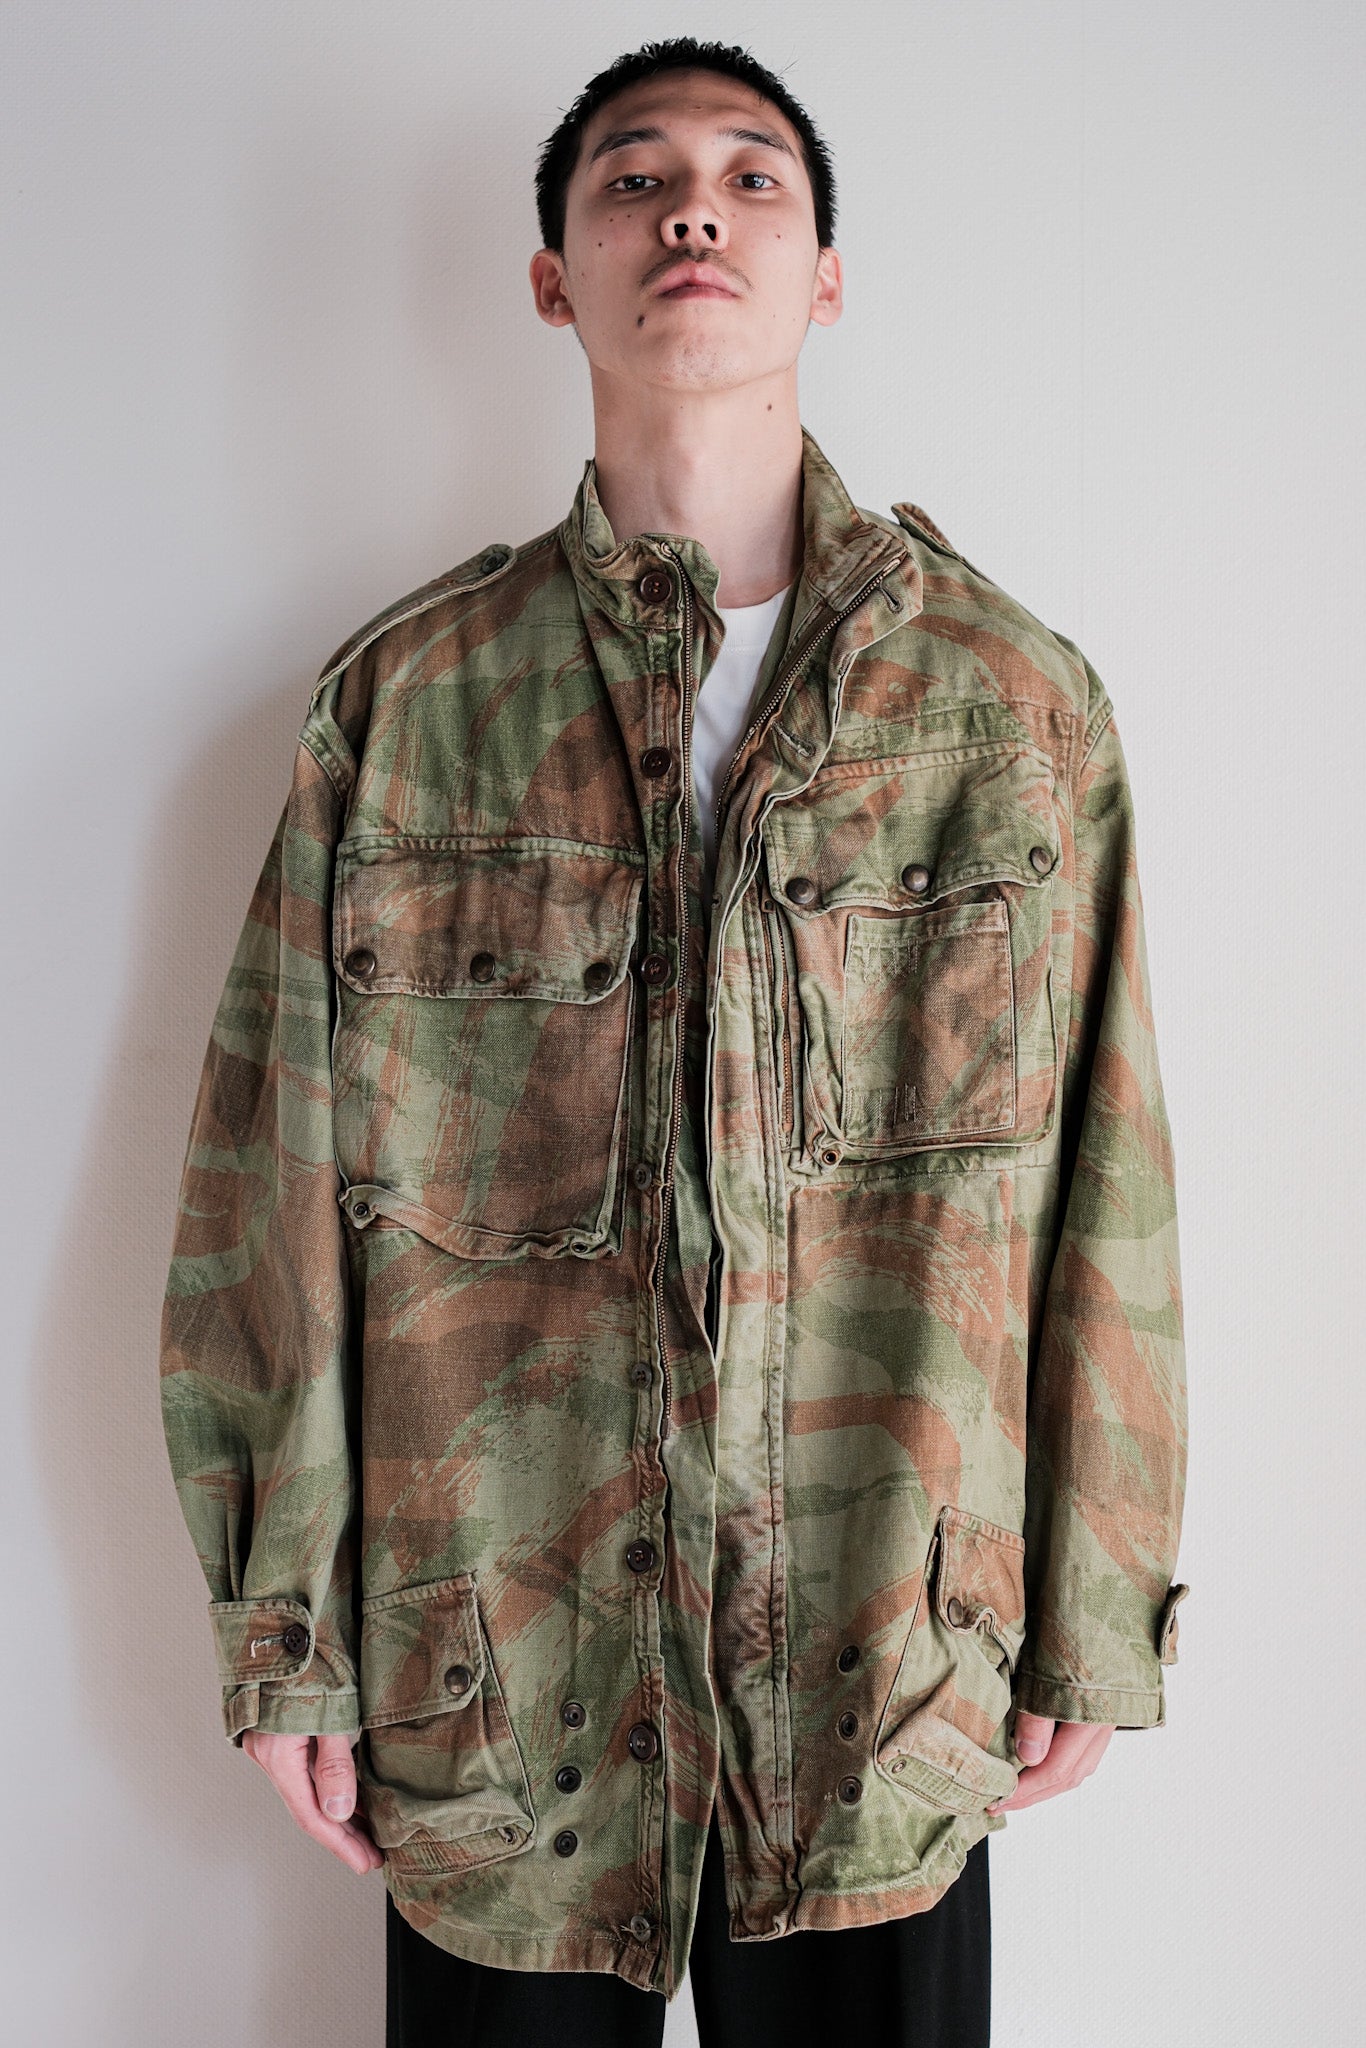 [~ 50's] French Army Tap47/53 Lizard Camouflage Paratrooper Jacket size.46